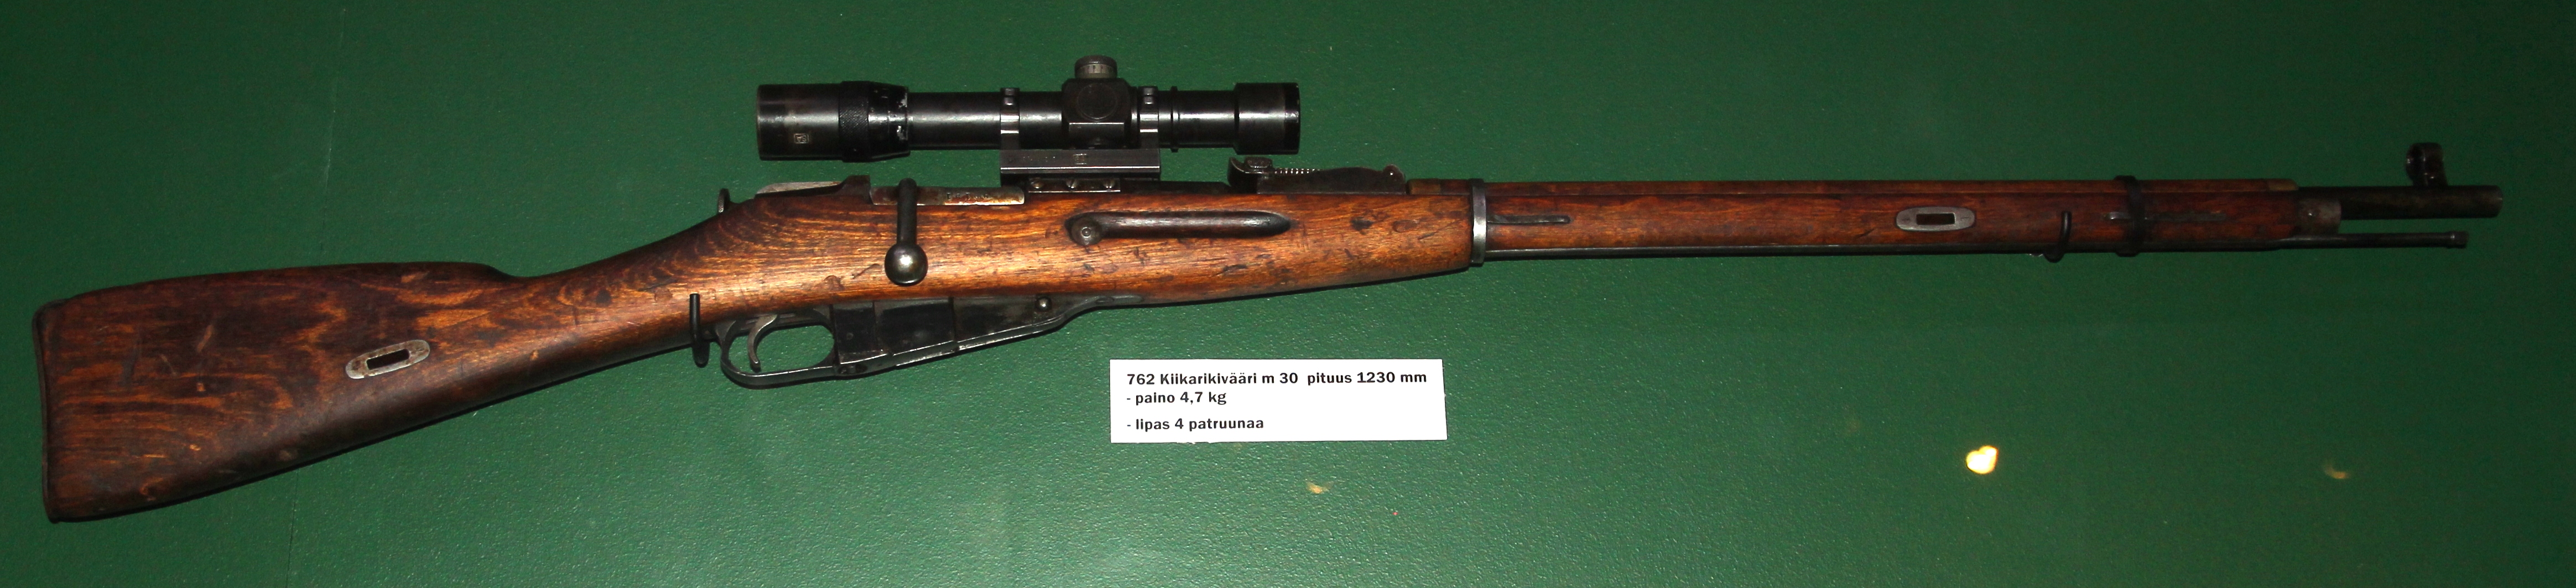 Mosin Nagant M91 30 Rifle Pics, Weapons Collection